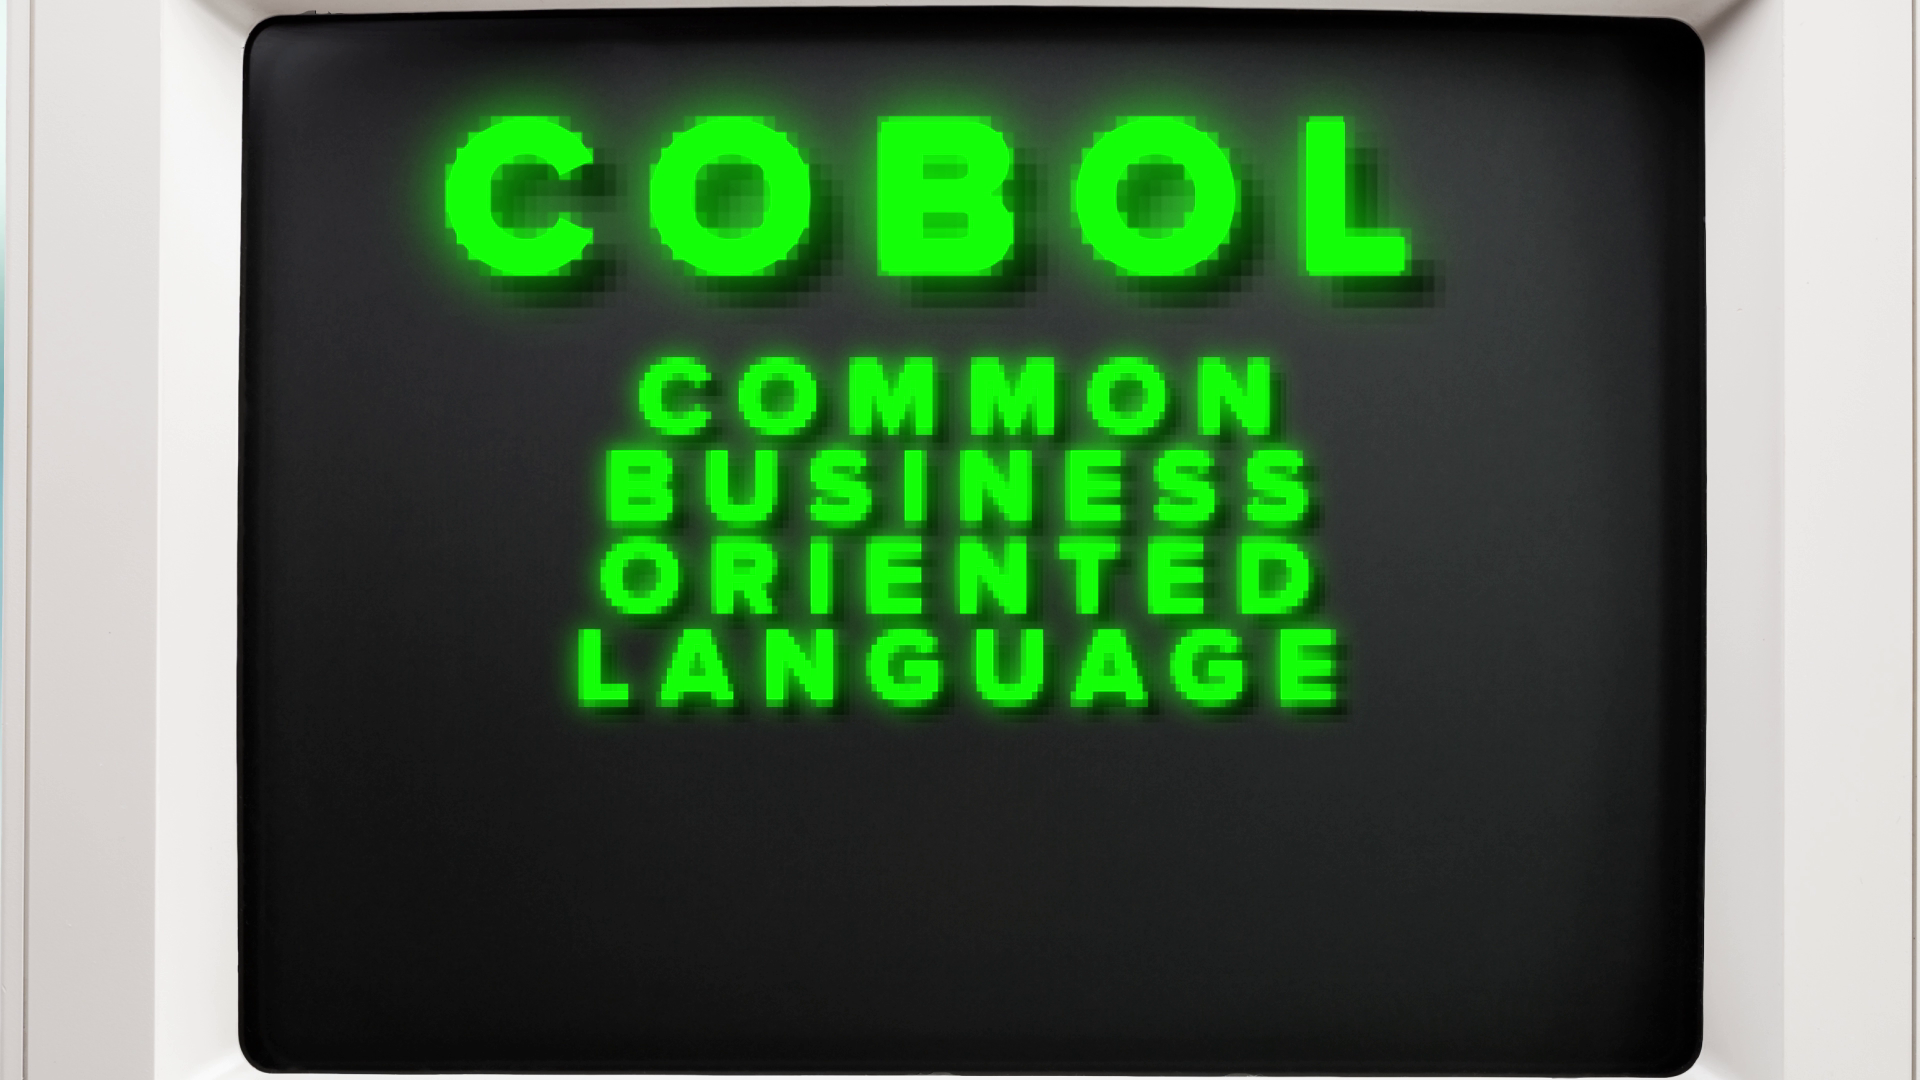 Lack of programmers experienced with COBOL computer language challenges states trying to provide expanded unemployment benefits.